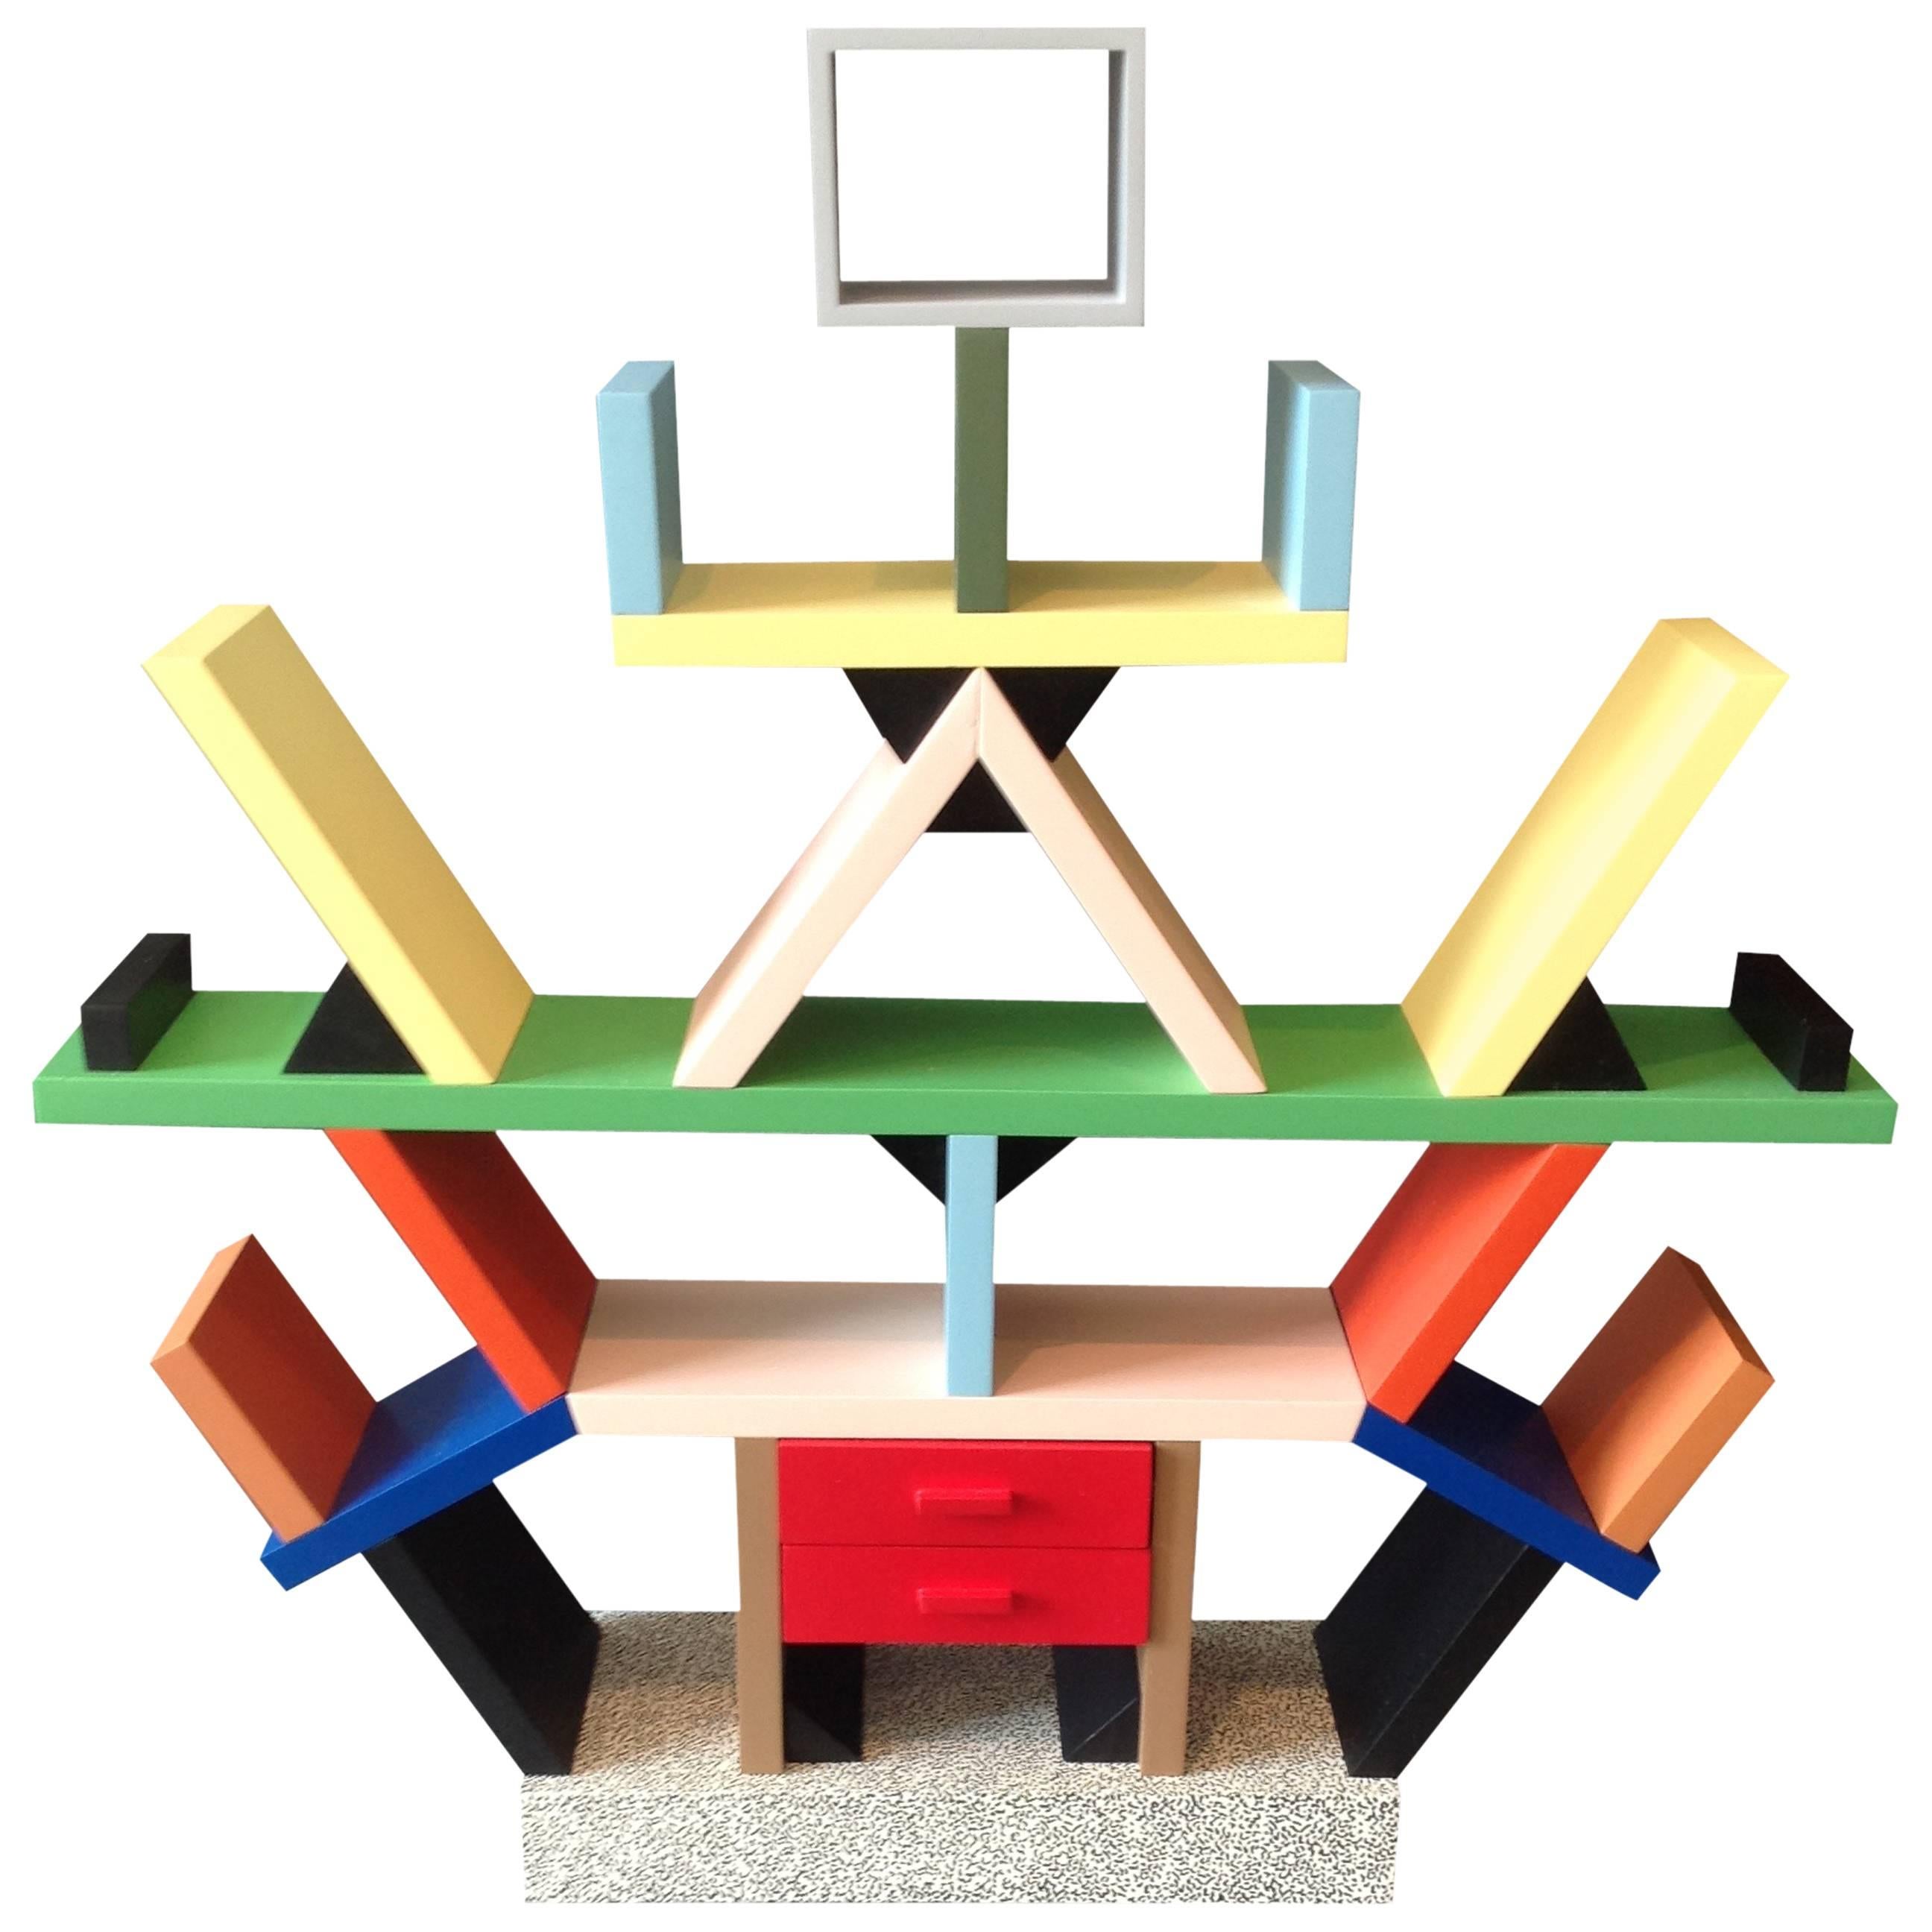 Carlton Miniature / 1:4 Scale by Ettore Sottsass For Sale